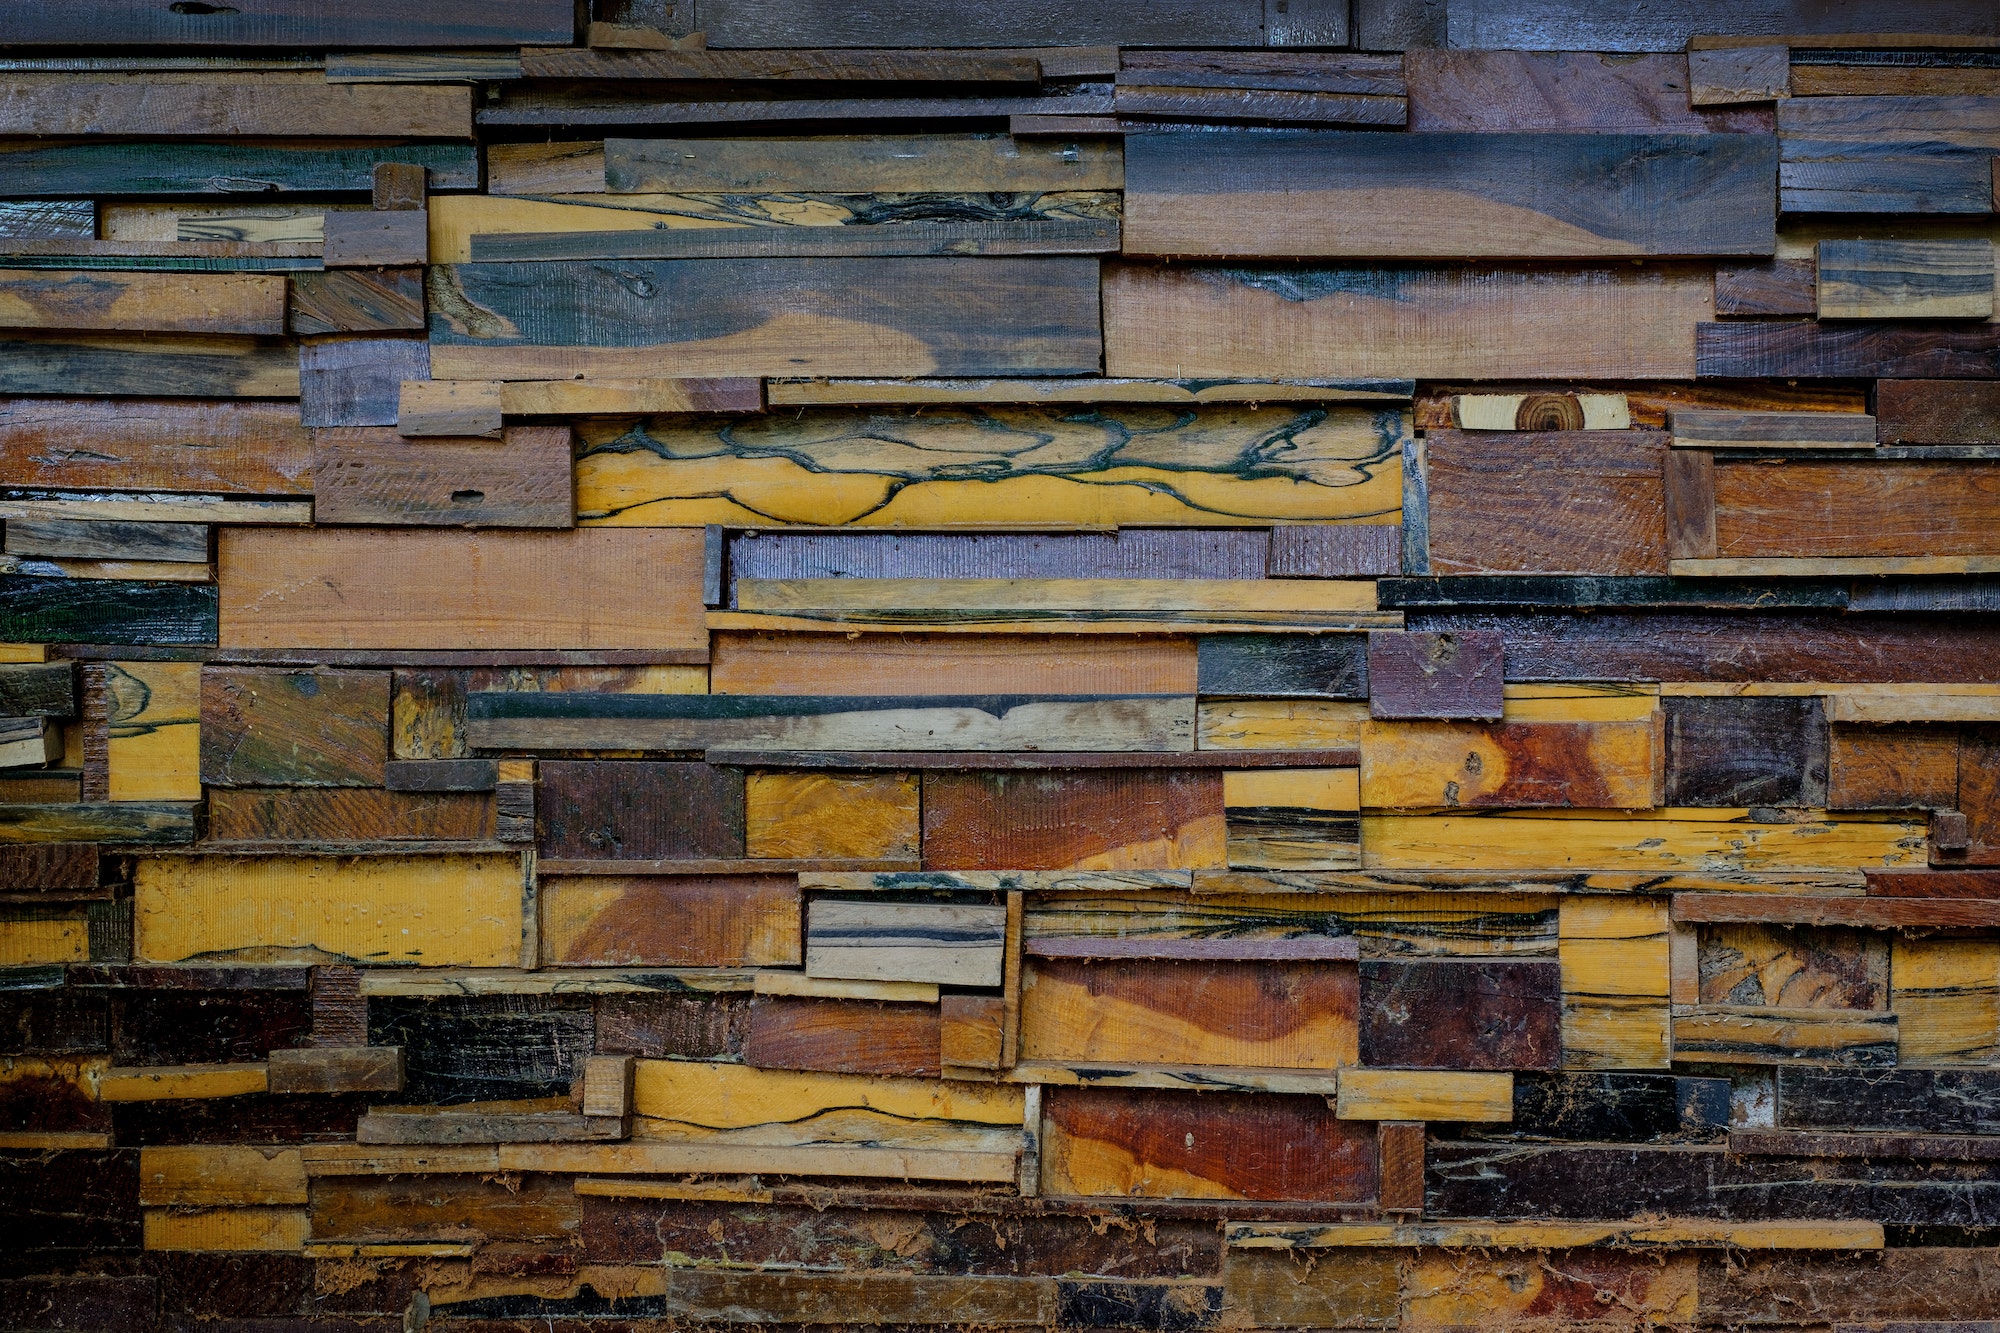 The Fundamentals Of Wood Selection: Choosing The Right Wood For Your Project